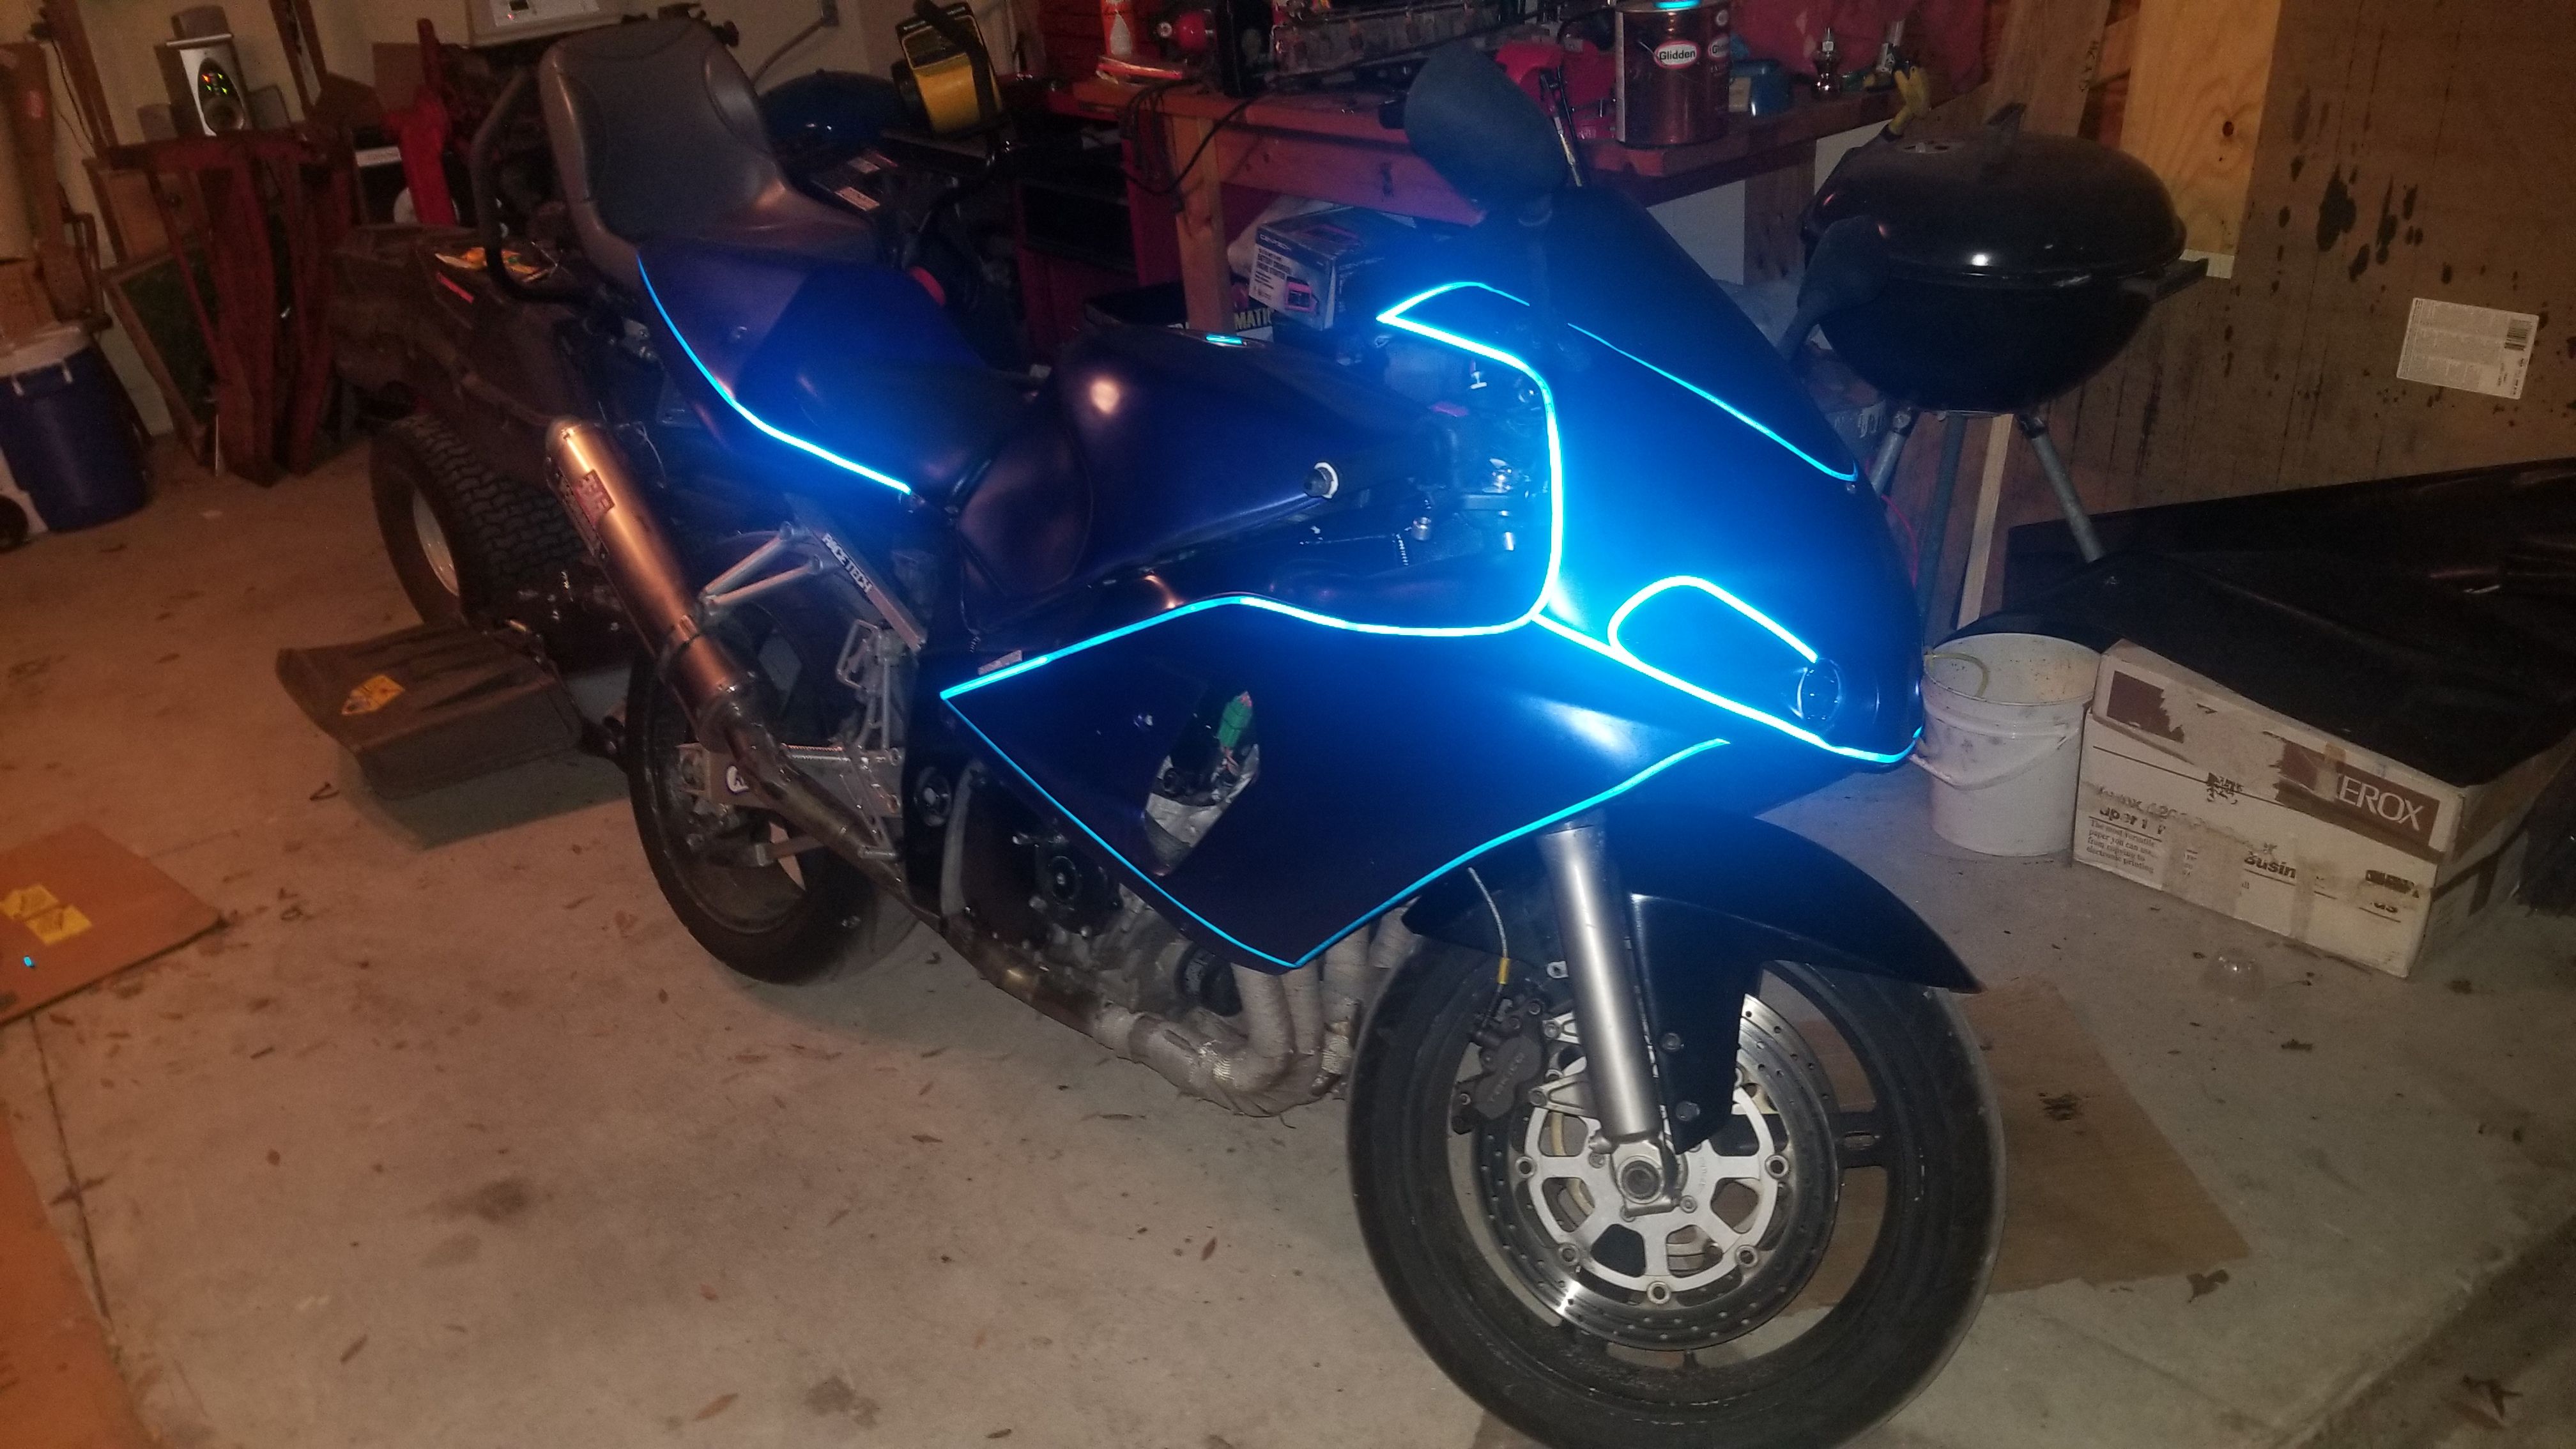 I just put the reflective tape on.